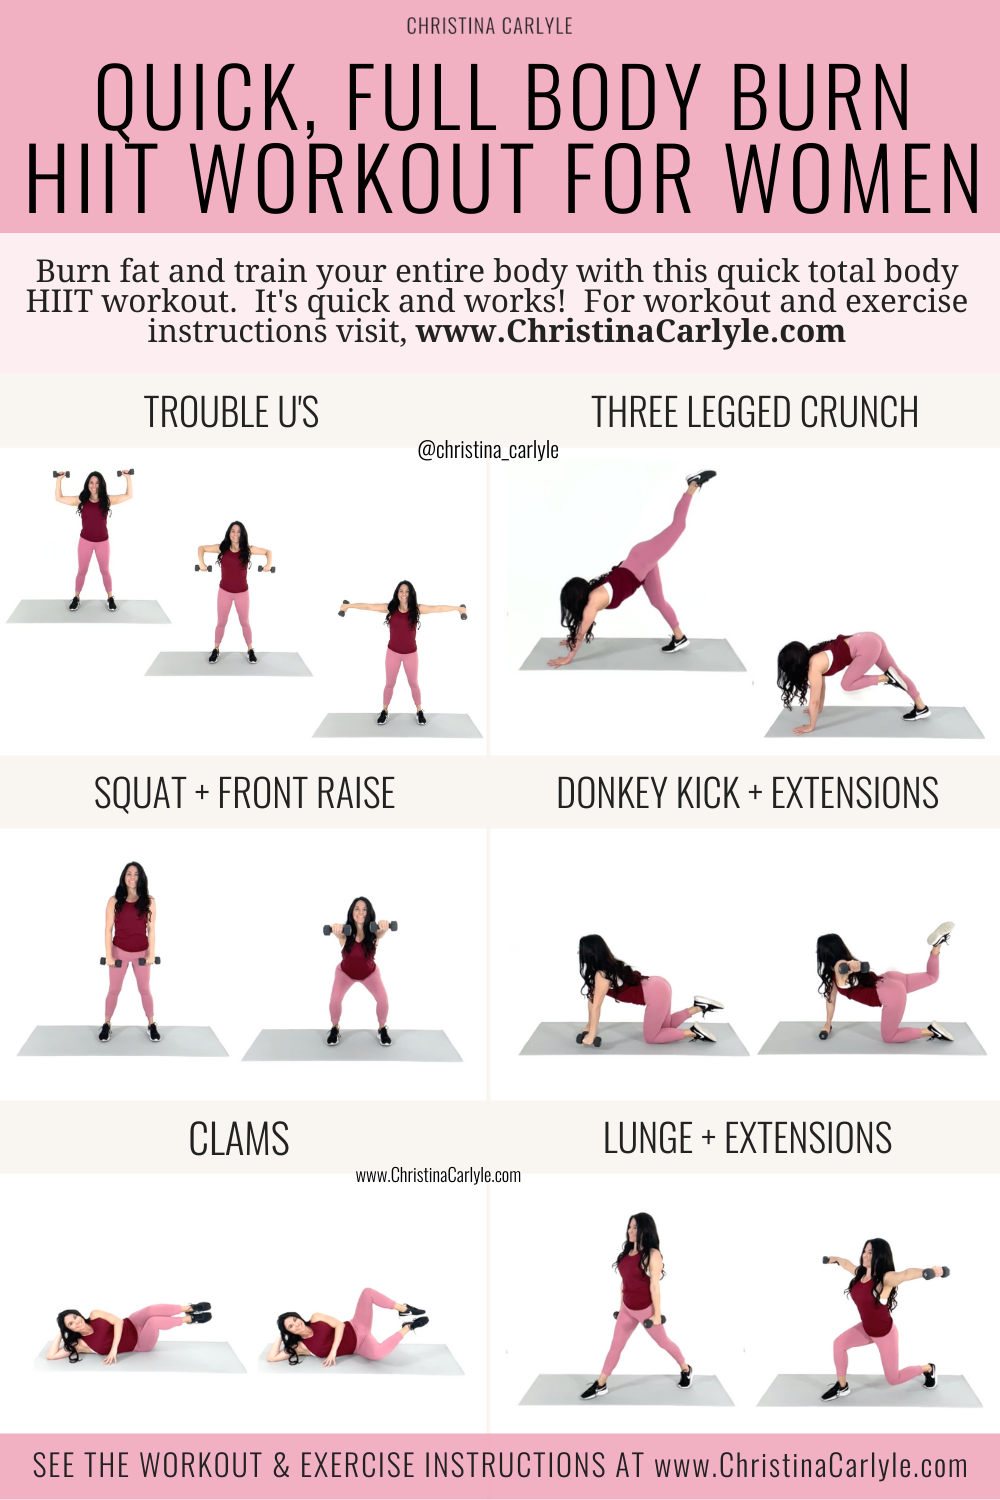 HIIT Workout for Women that Burns Fat & Tones the Full Body